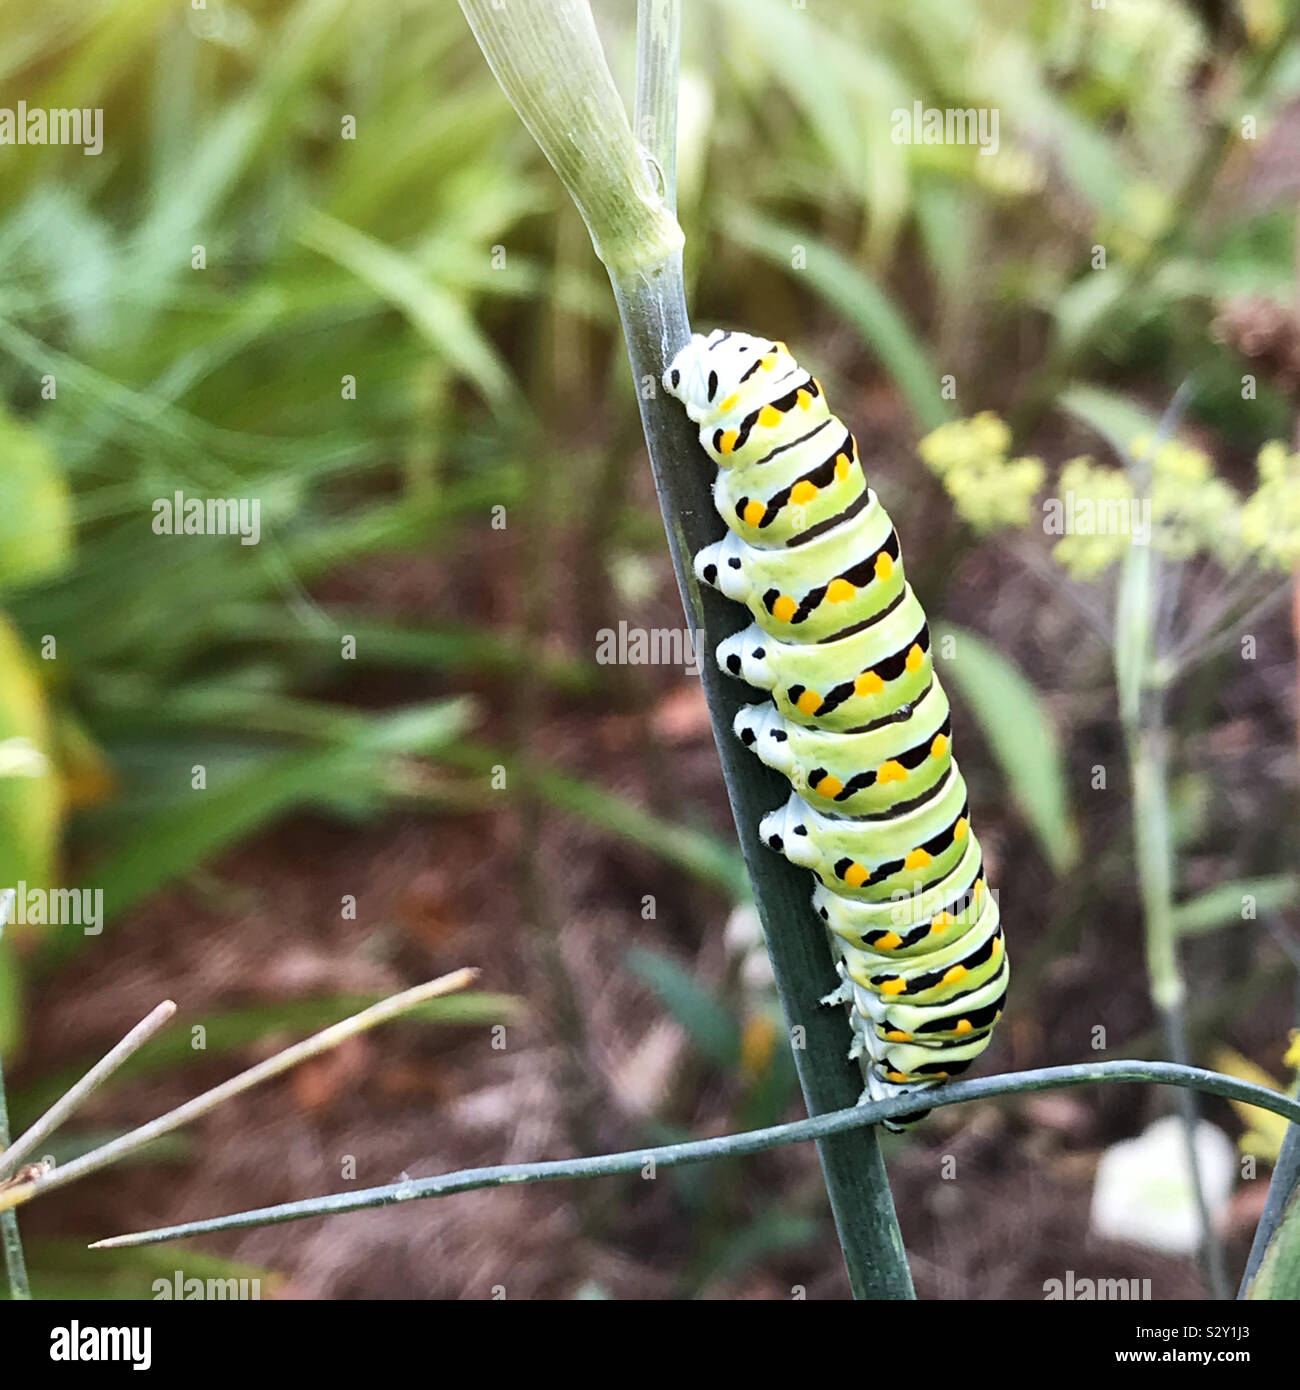 The life cycle of the black swallowtail butterfly during its caterpillar stage. Stock Photo